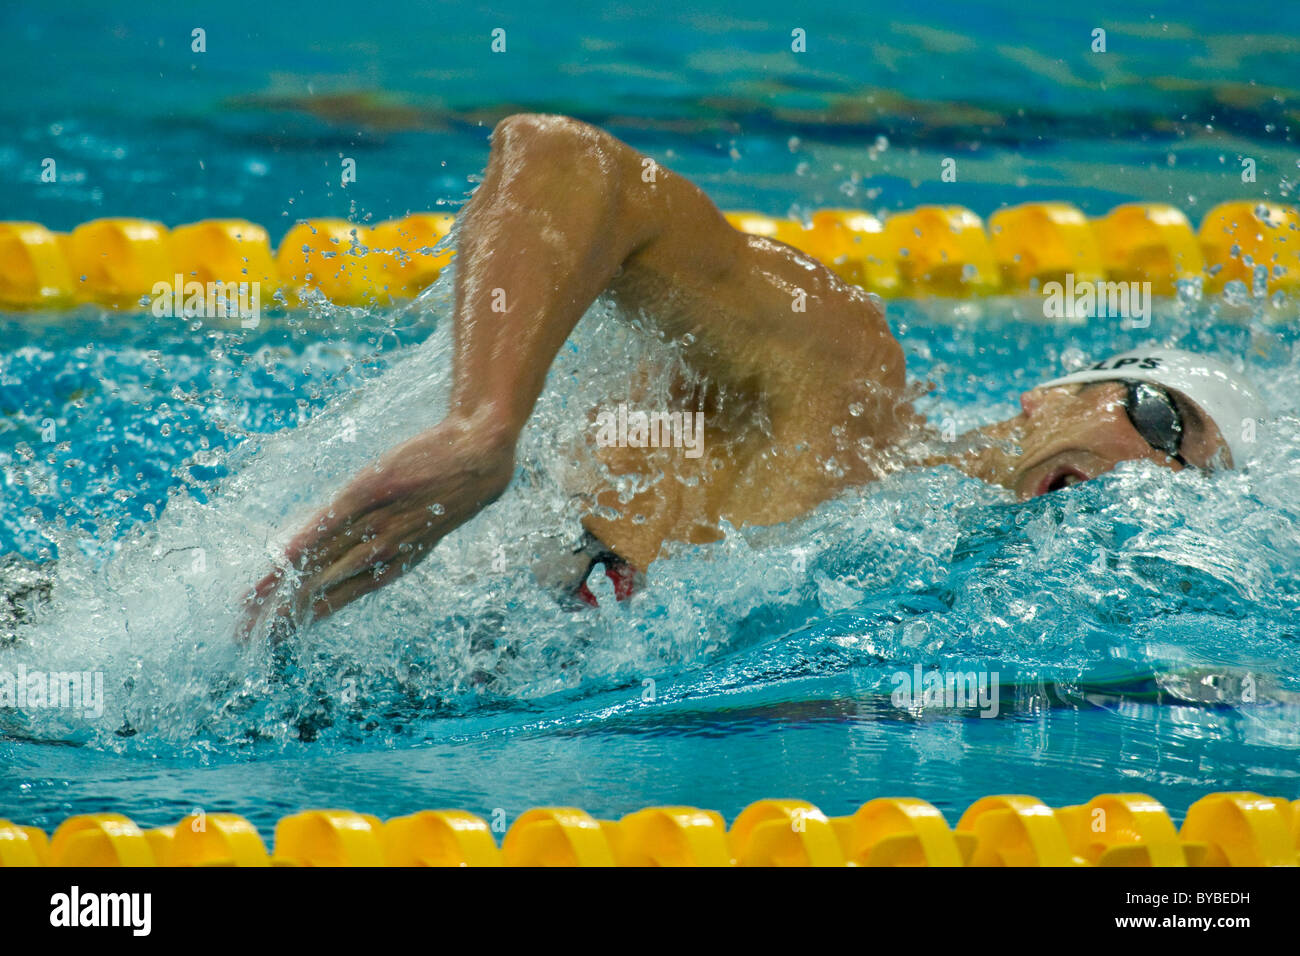 Michael Phelps (USA) competing in the 200 free swimming competition at the 2008 Olympic Summer Games, Beijing, China Stock Photo